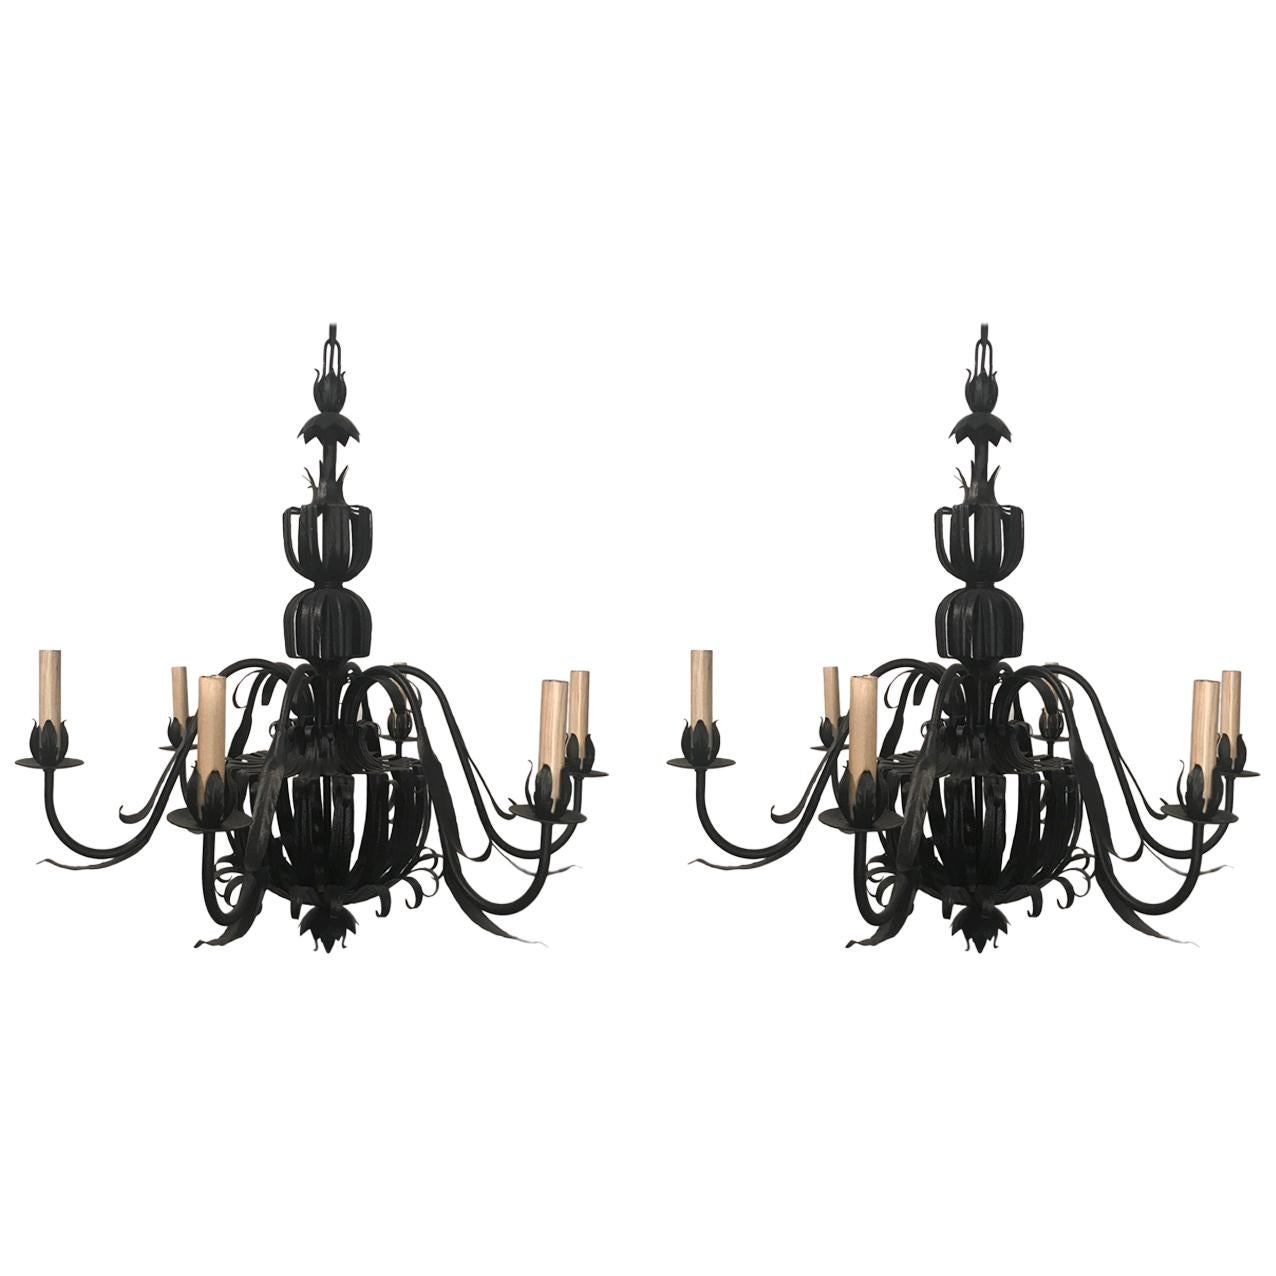 Pair of Italian Wrought- Iron Midcentury Six-Light Chandeliers For Sale